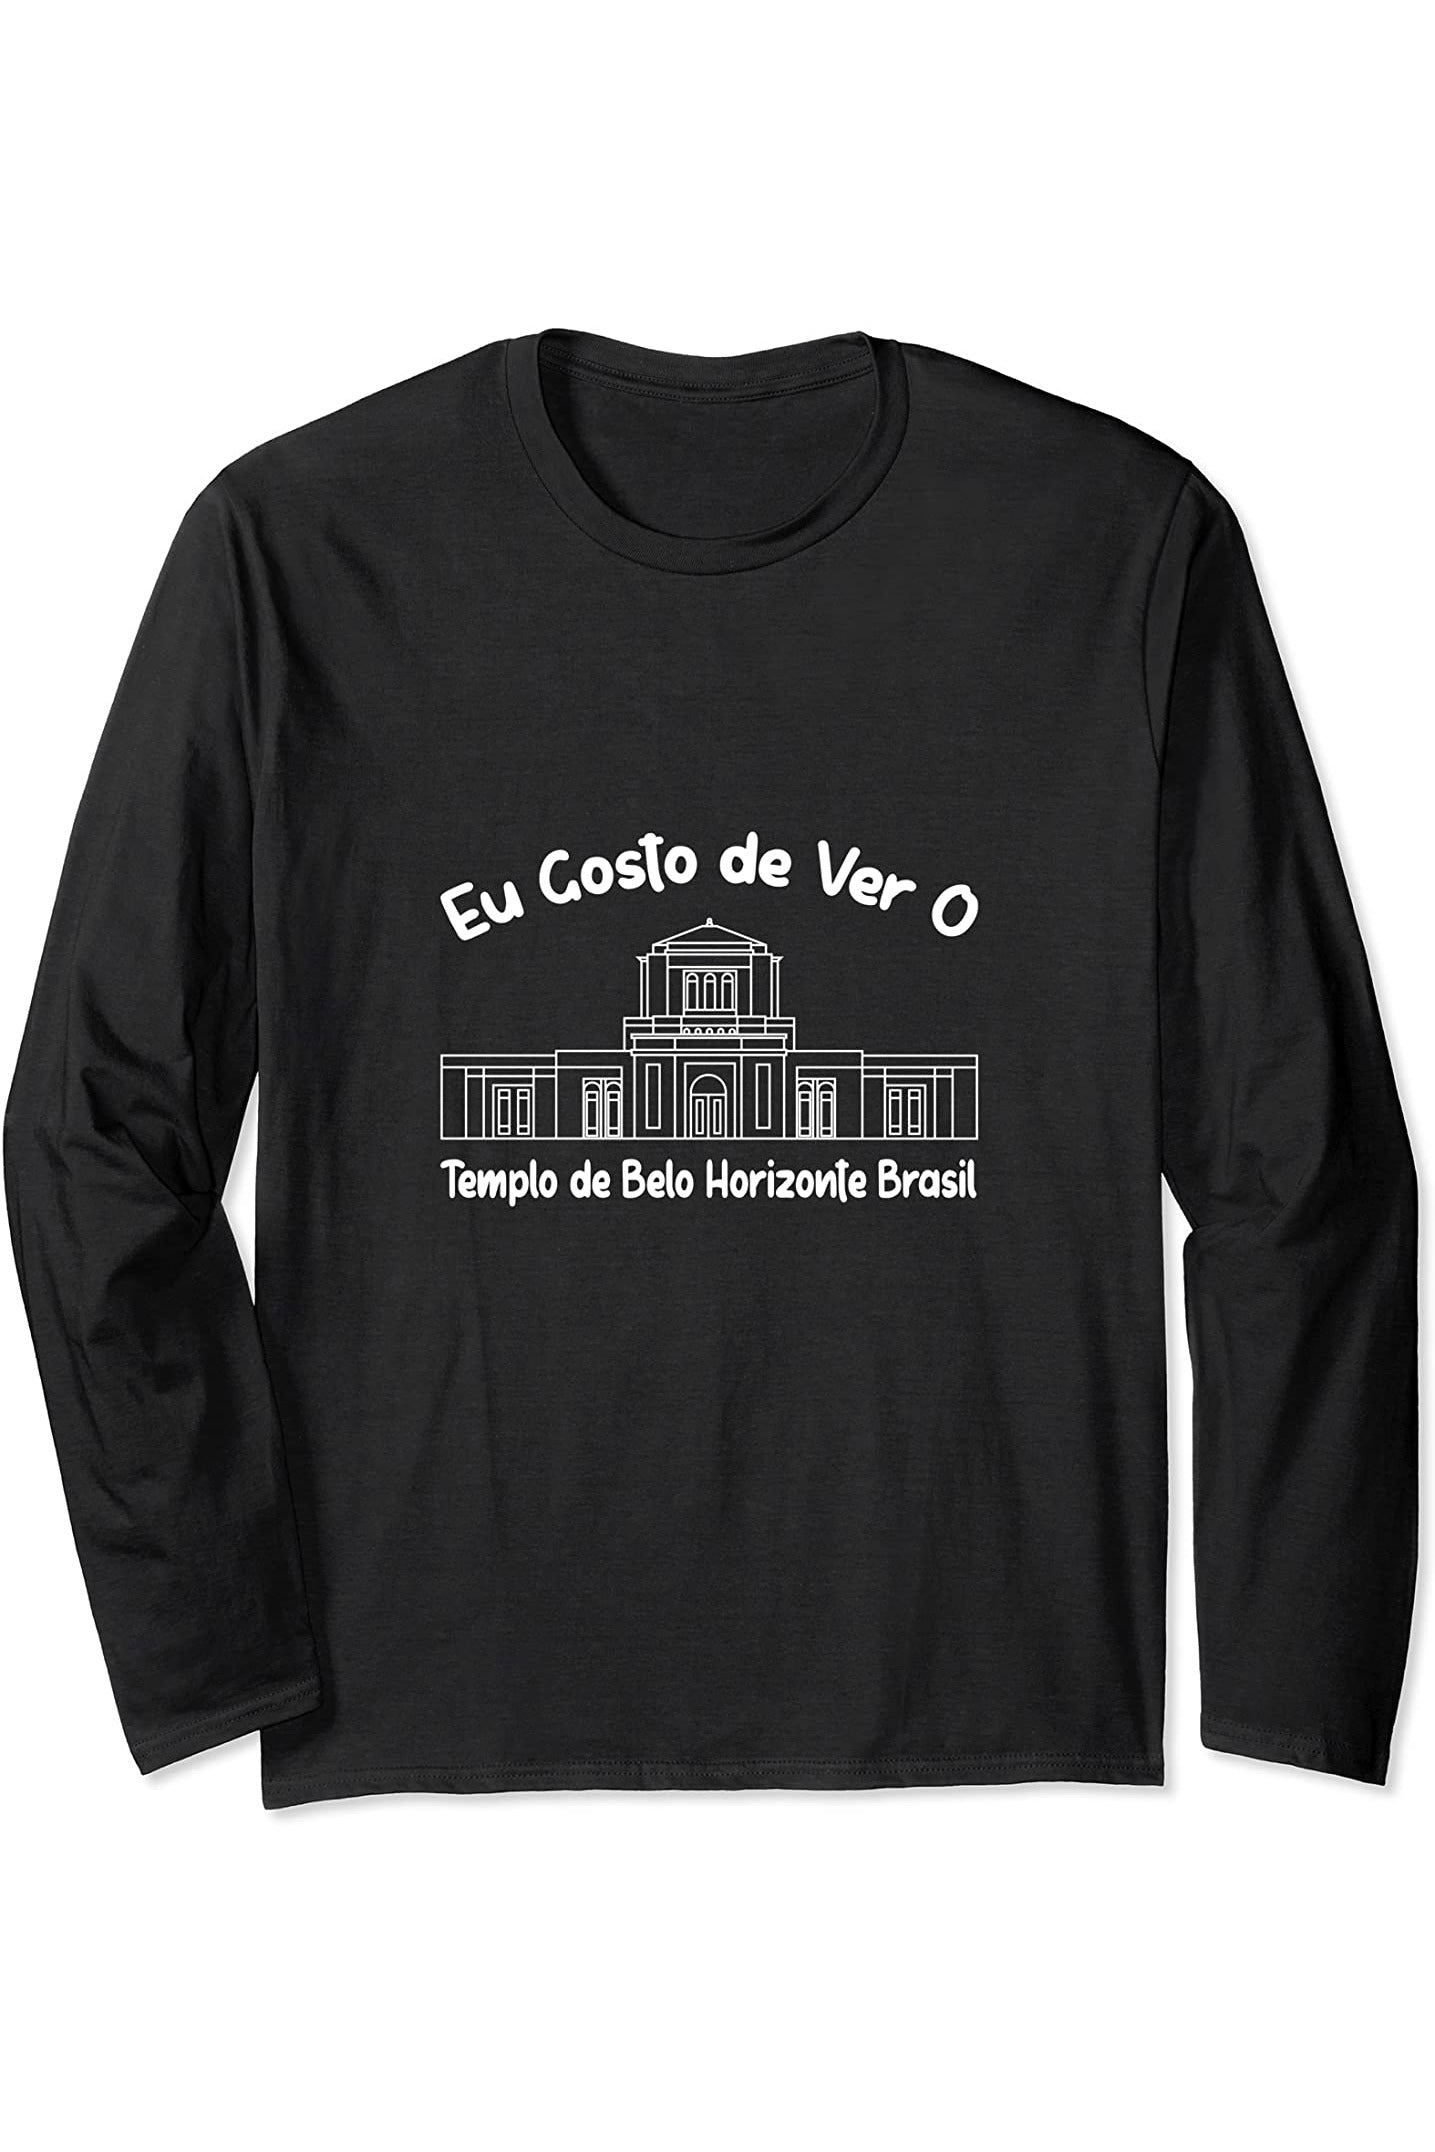 Belo Horizonte Brazil Temple Long Sleeve T-Shirt - Primary Style (Portuguese) US